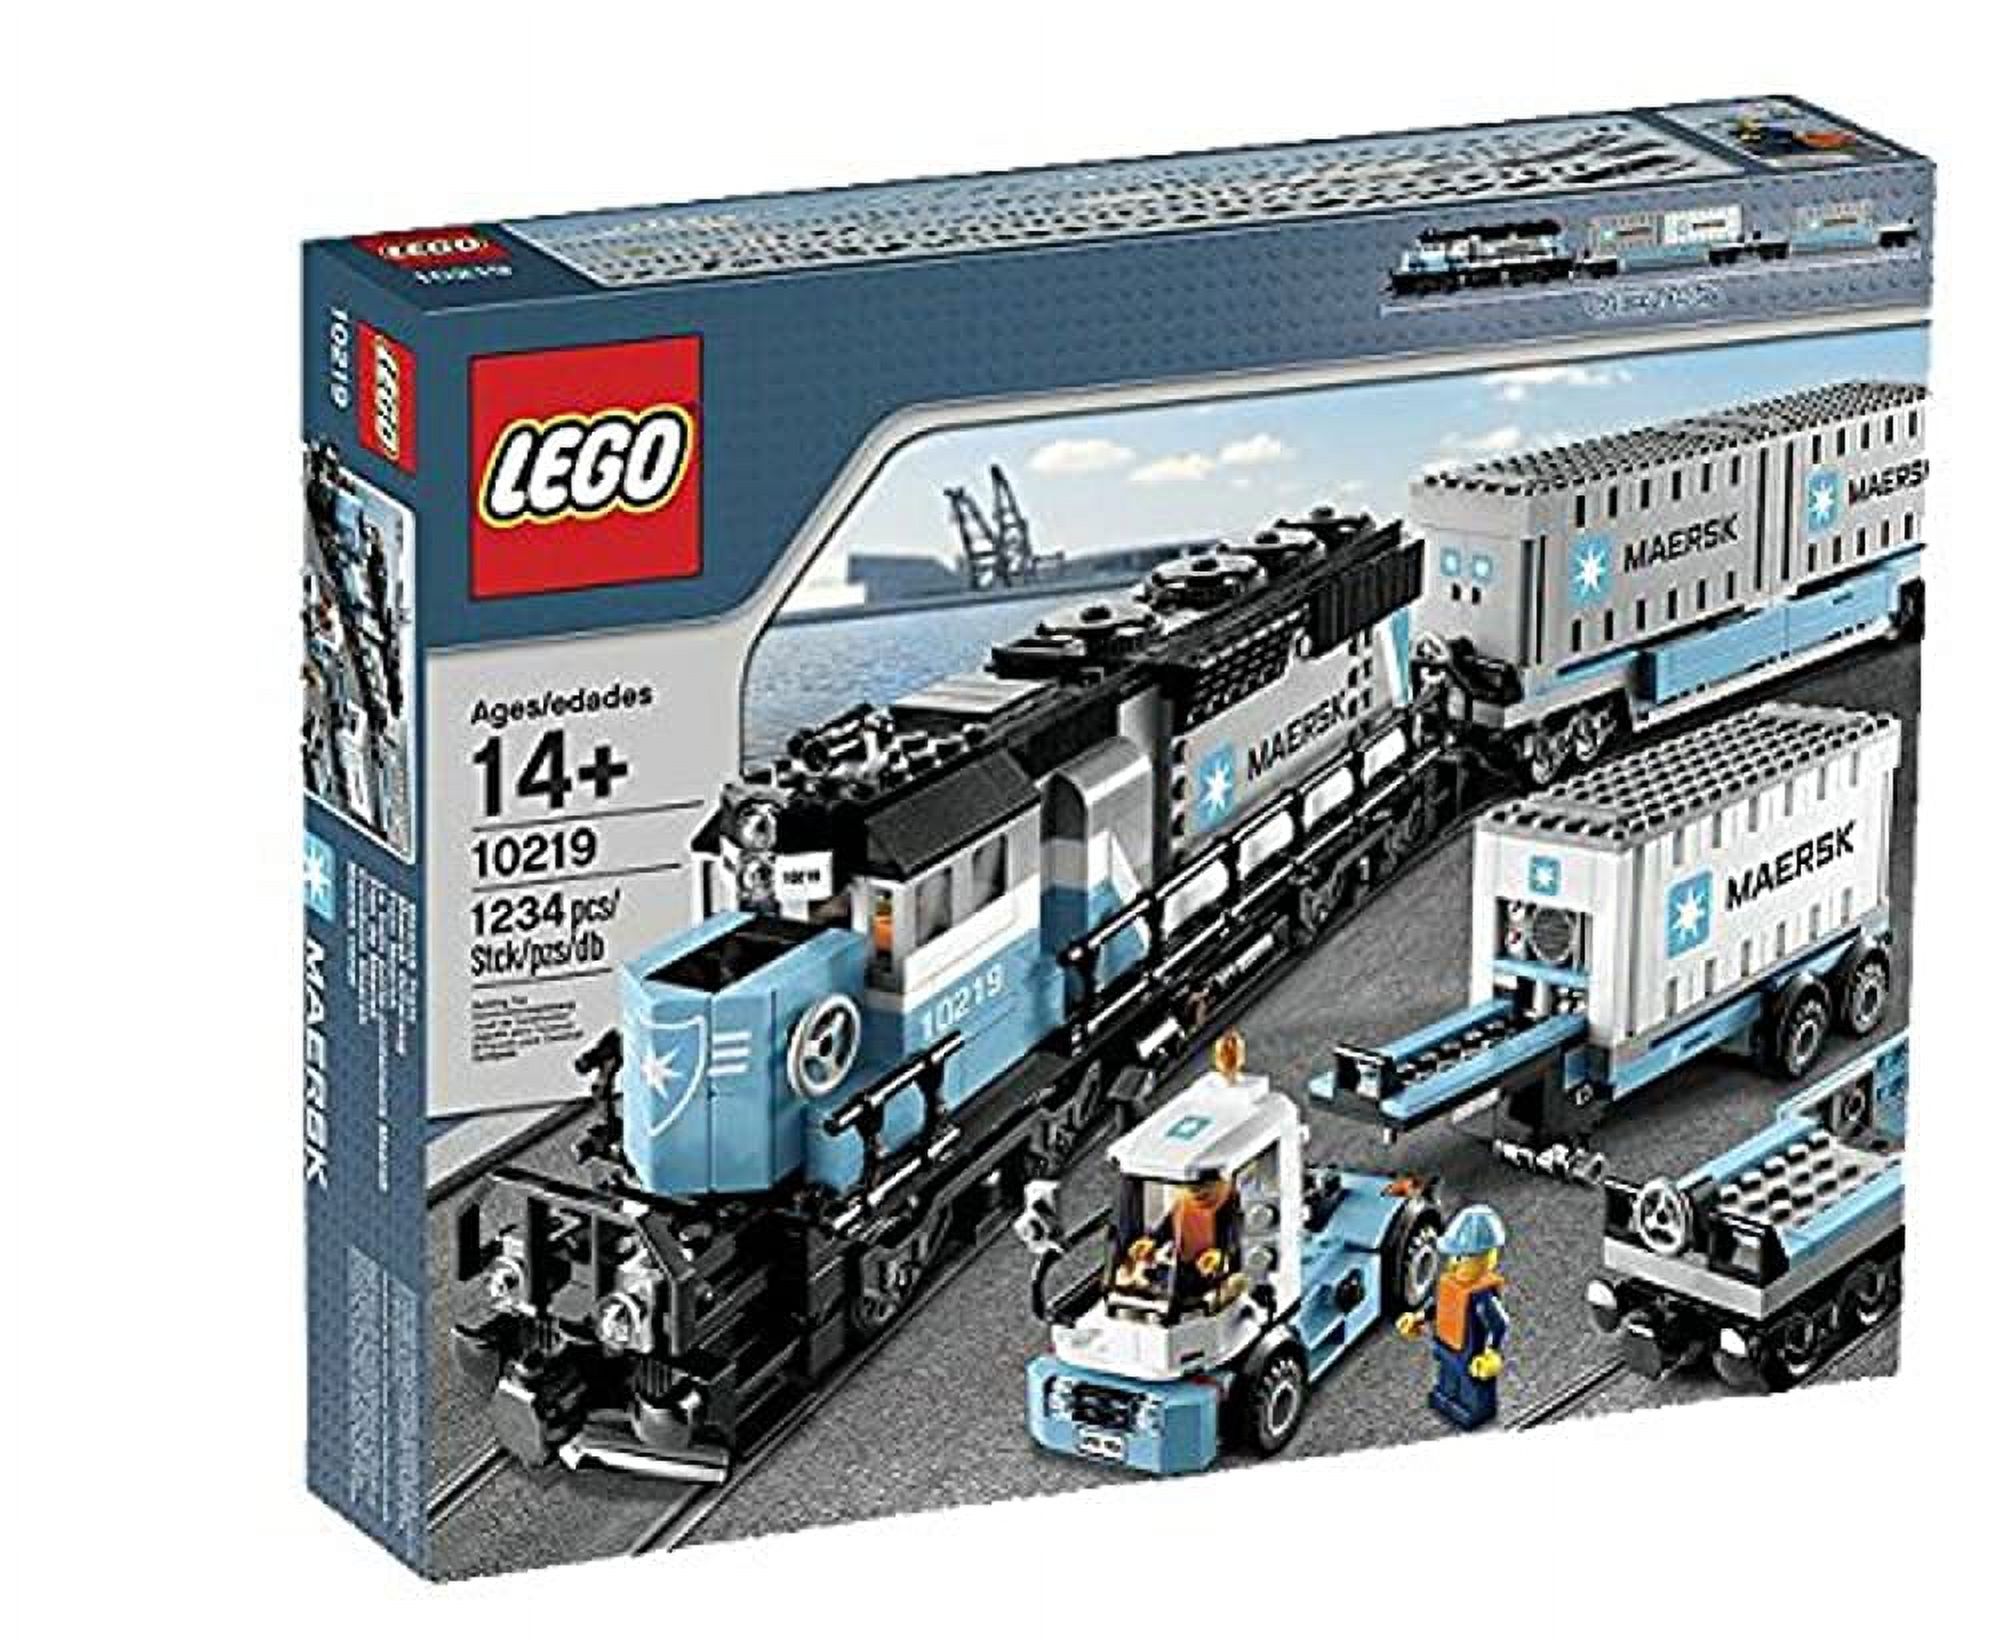 LEGO Creator Maersk Train 10219 Discontinued by manufacturer - image 1 of 5